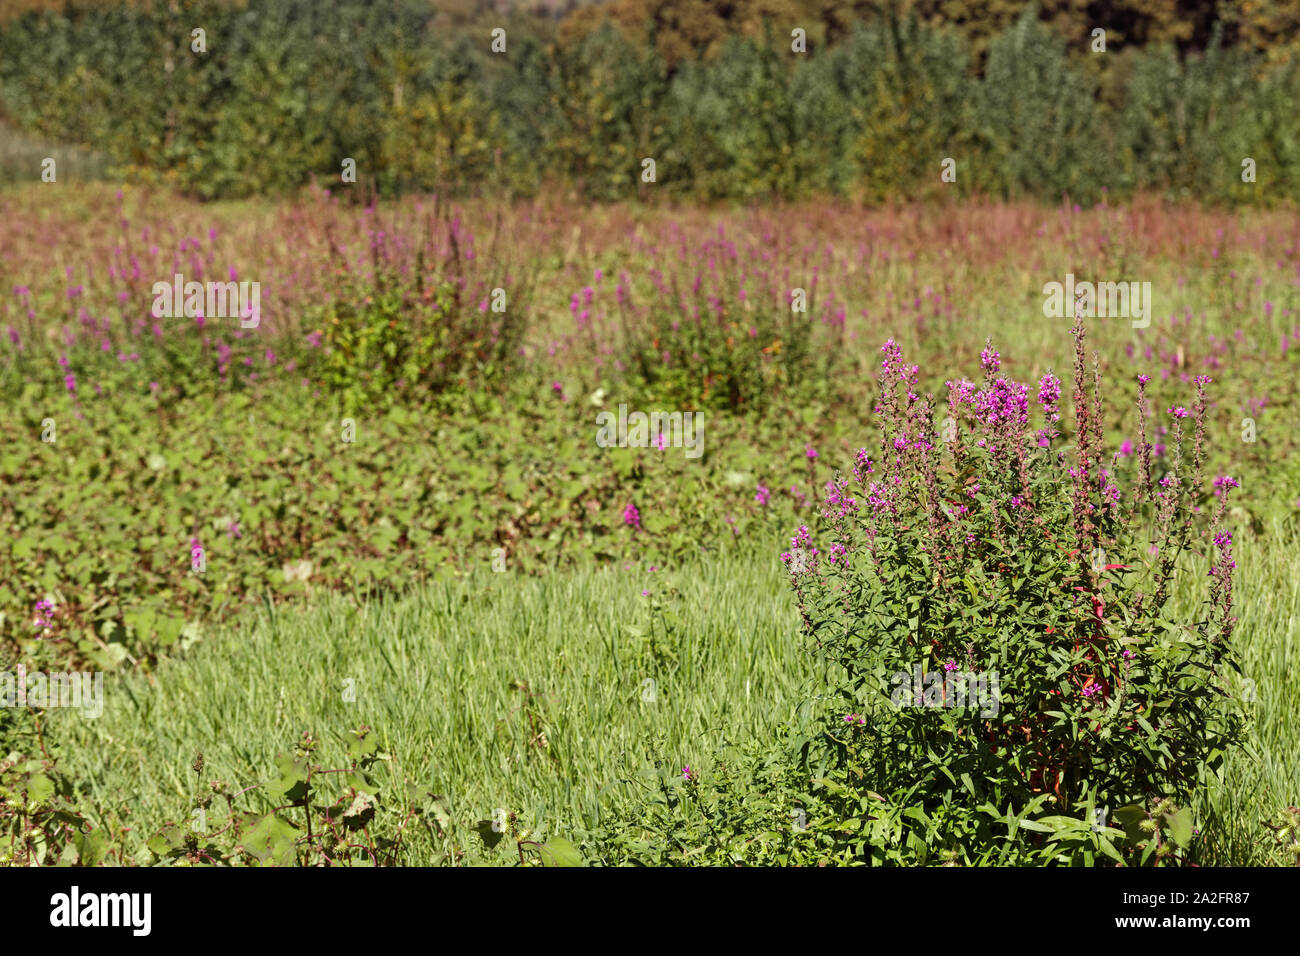 Swathes of magenta / purple wildflowers Swainsona Galegifolia growing on a dried lake bottom and reeds in the back at Belgrad Forest of Istanbul Stock Photo